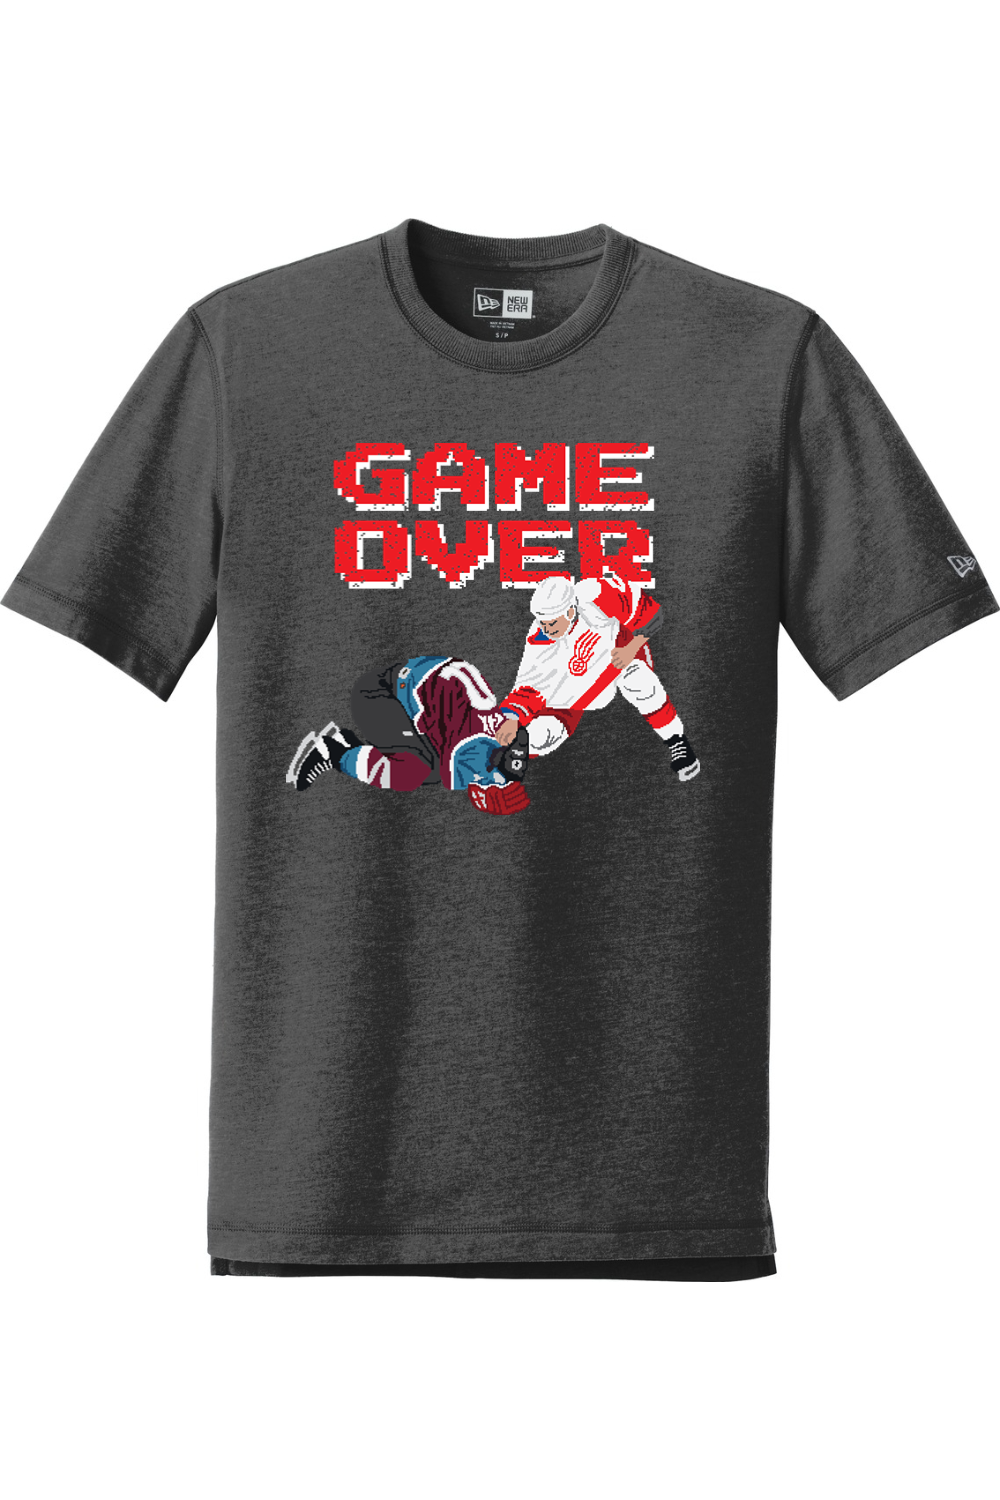 Game Over - New Era Sueded Cotton Blend Wings Tee